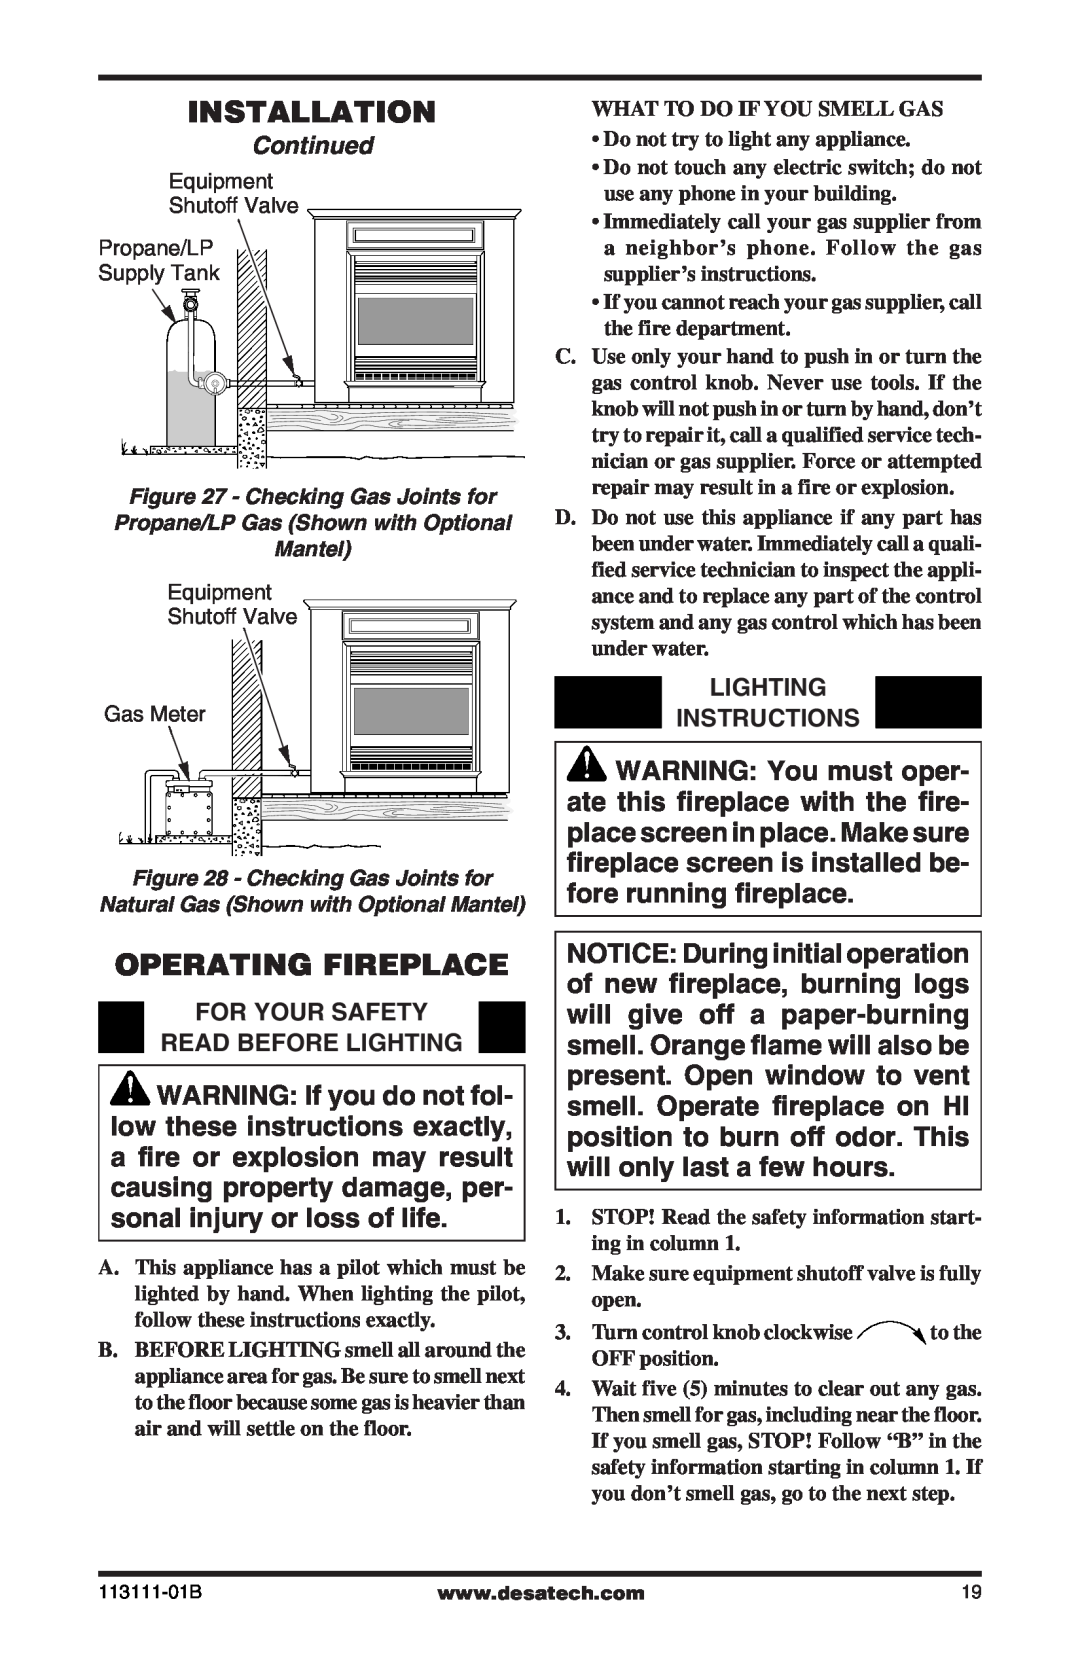 Desa VMH26TNC Installation, Operating Fireplace, Continued, Lighting Instructions, For Your Safety Read Before Lighting 